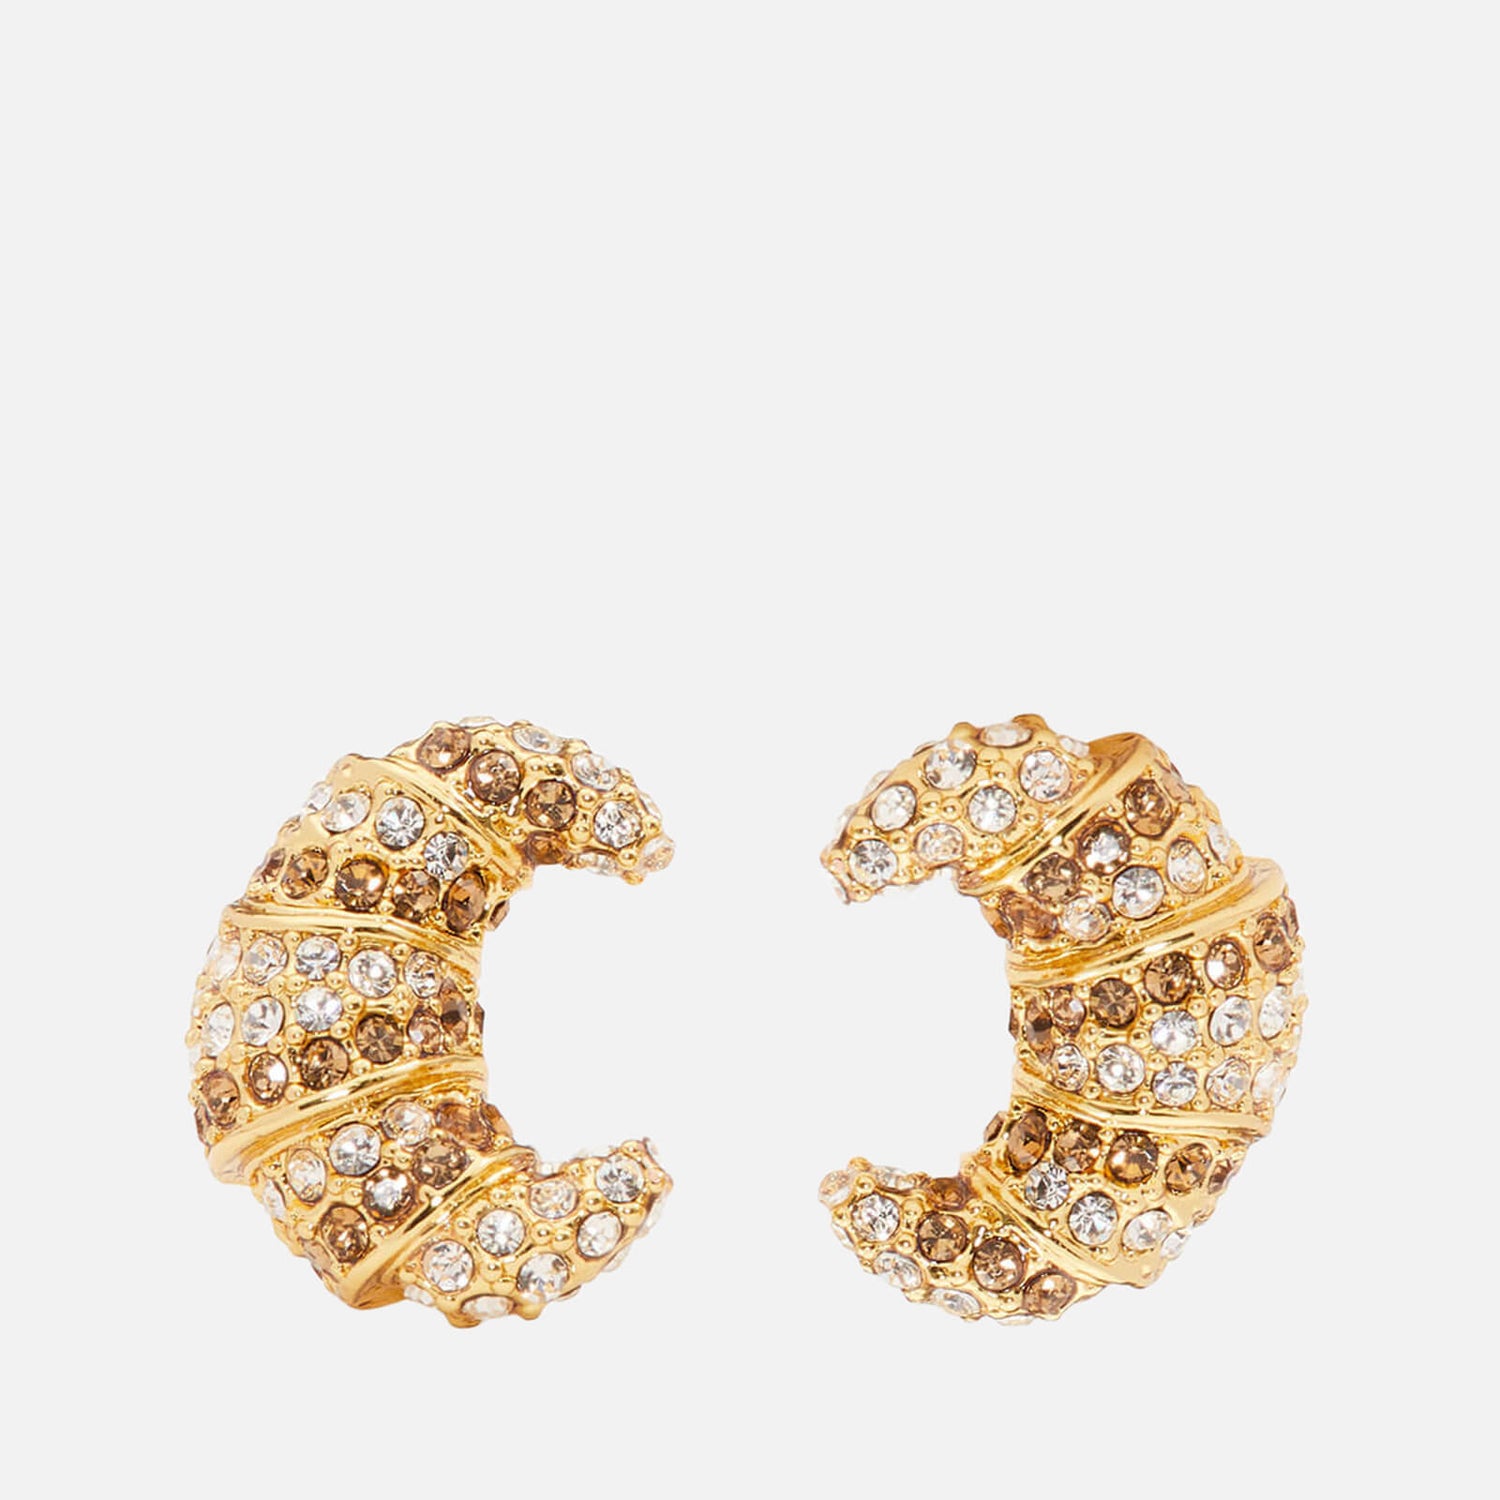 Kate Spade New York Croissant Gold-Tone and Crystal Studs